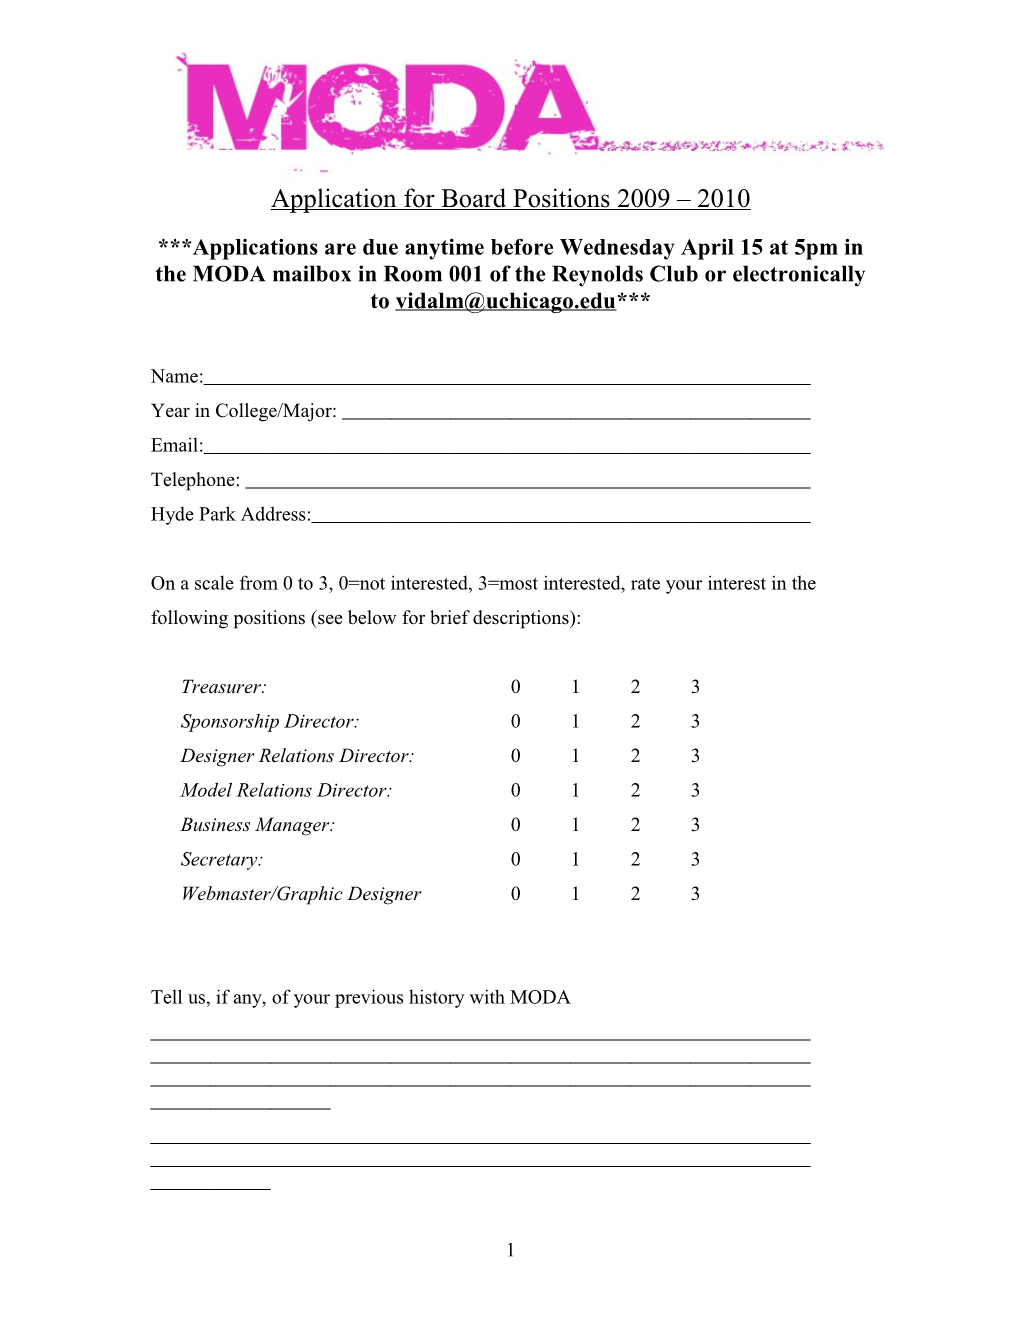 Application for Board Positions 2007 2008